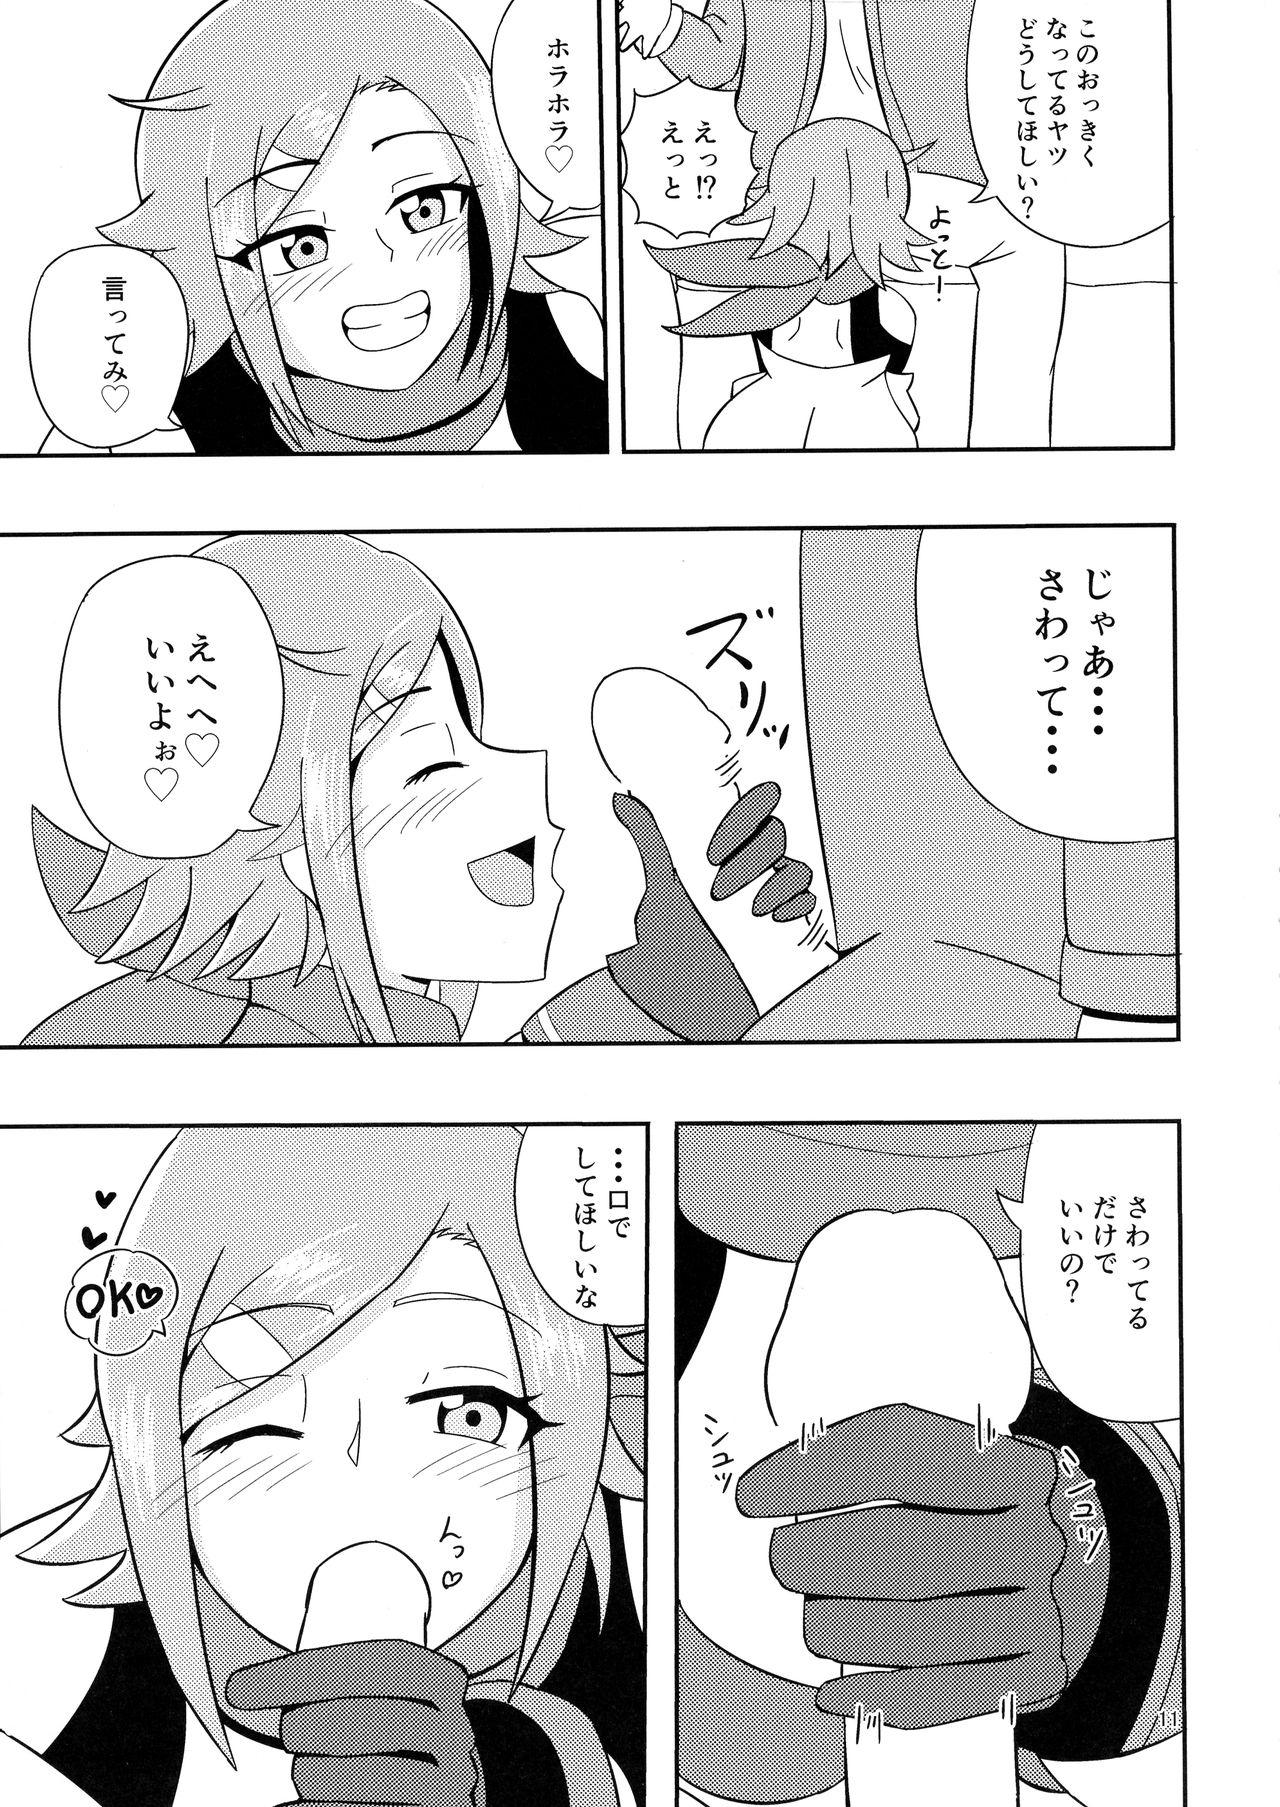 Work Party Shiyou! - Selector infected wixoss Ebony - Page 11